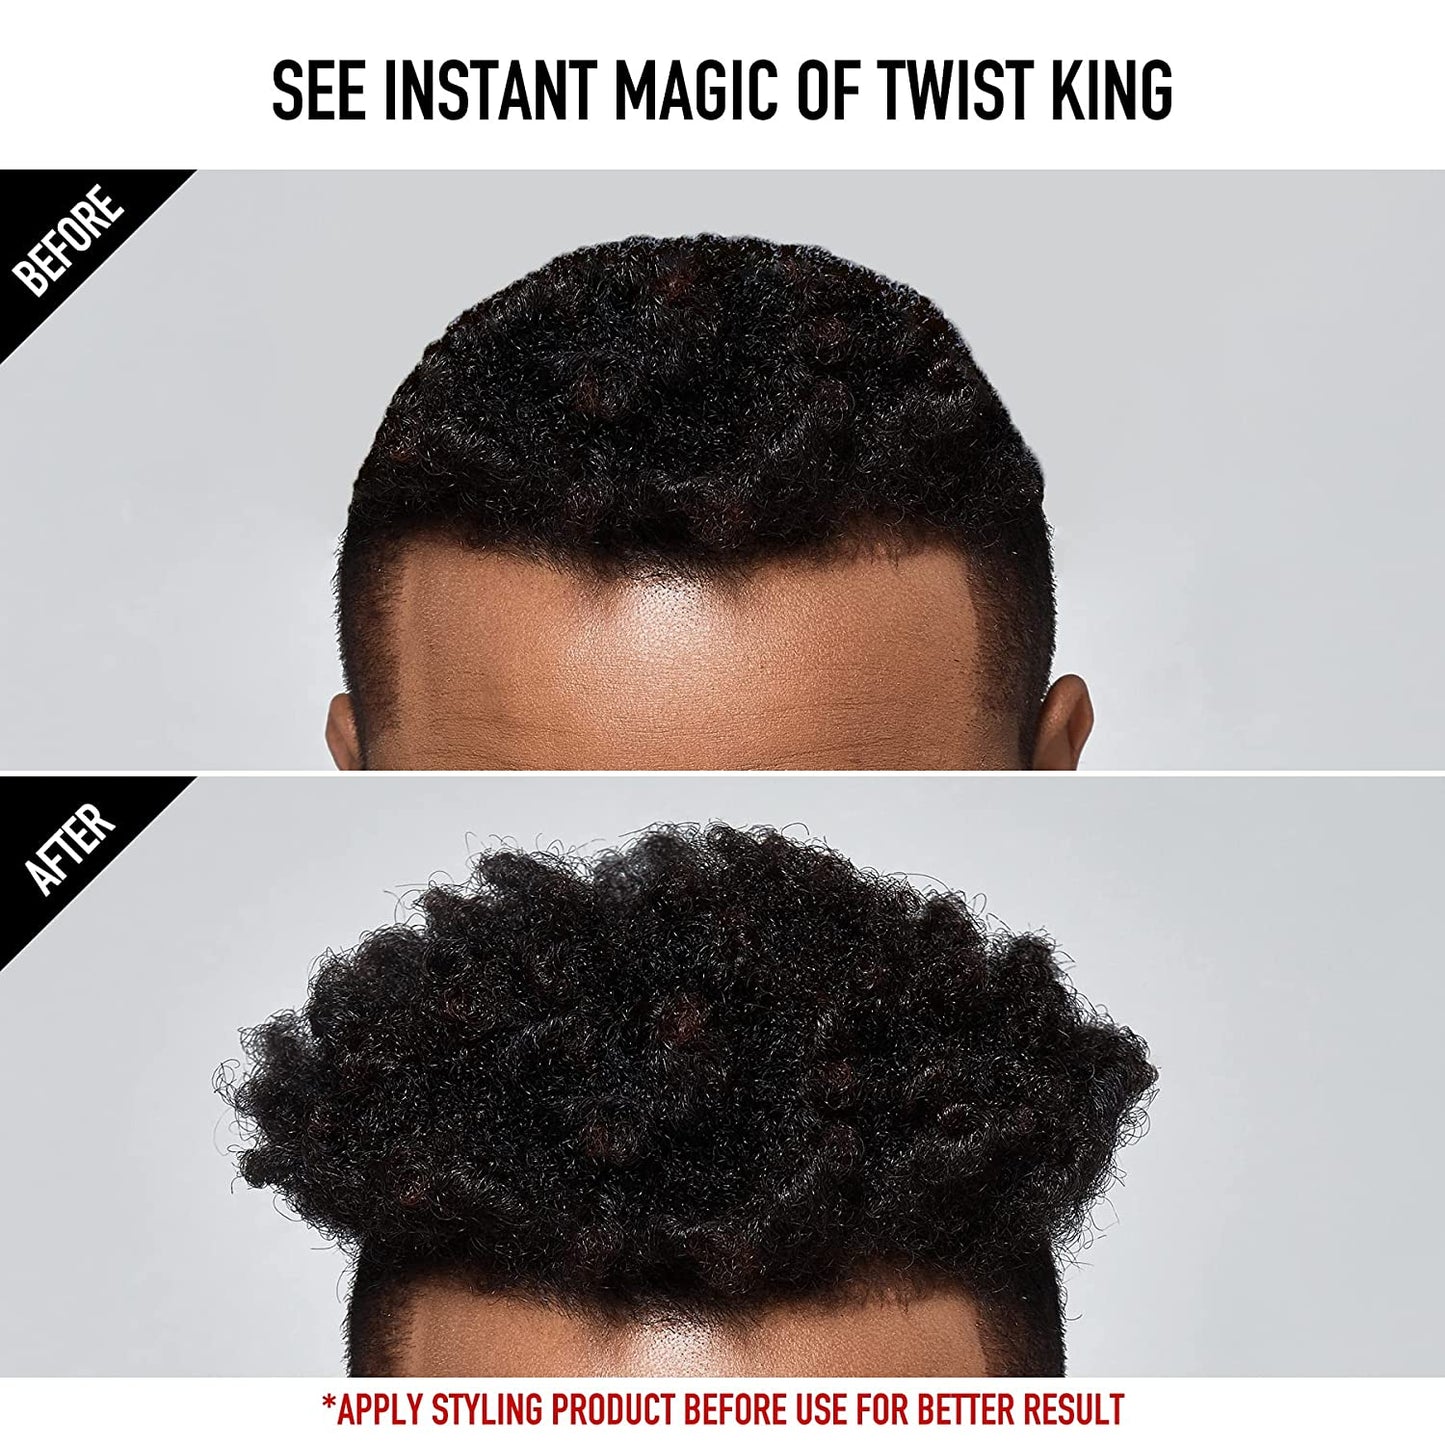 Red by Kiss Bow Wow X Twist King Curved & Densed